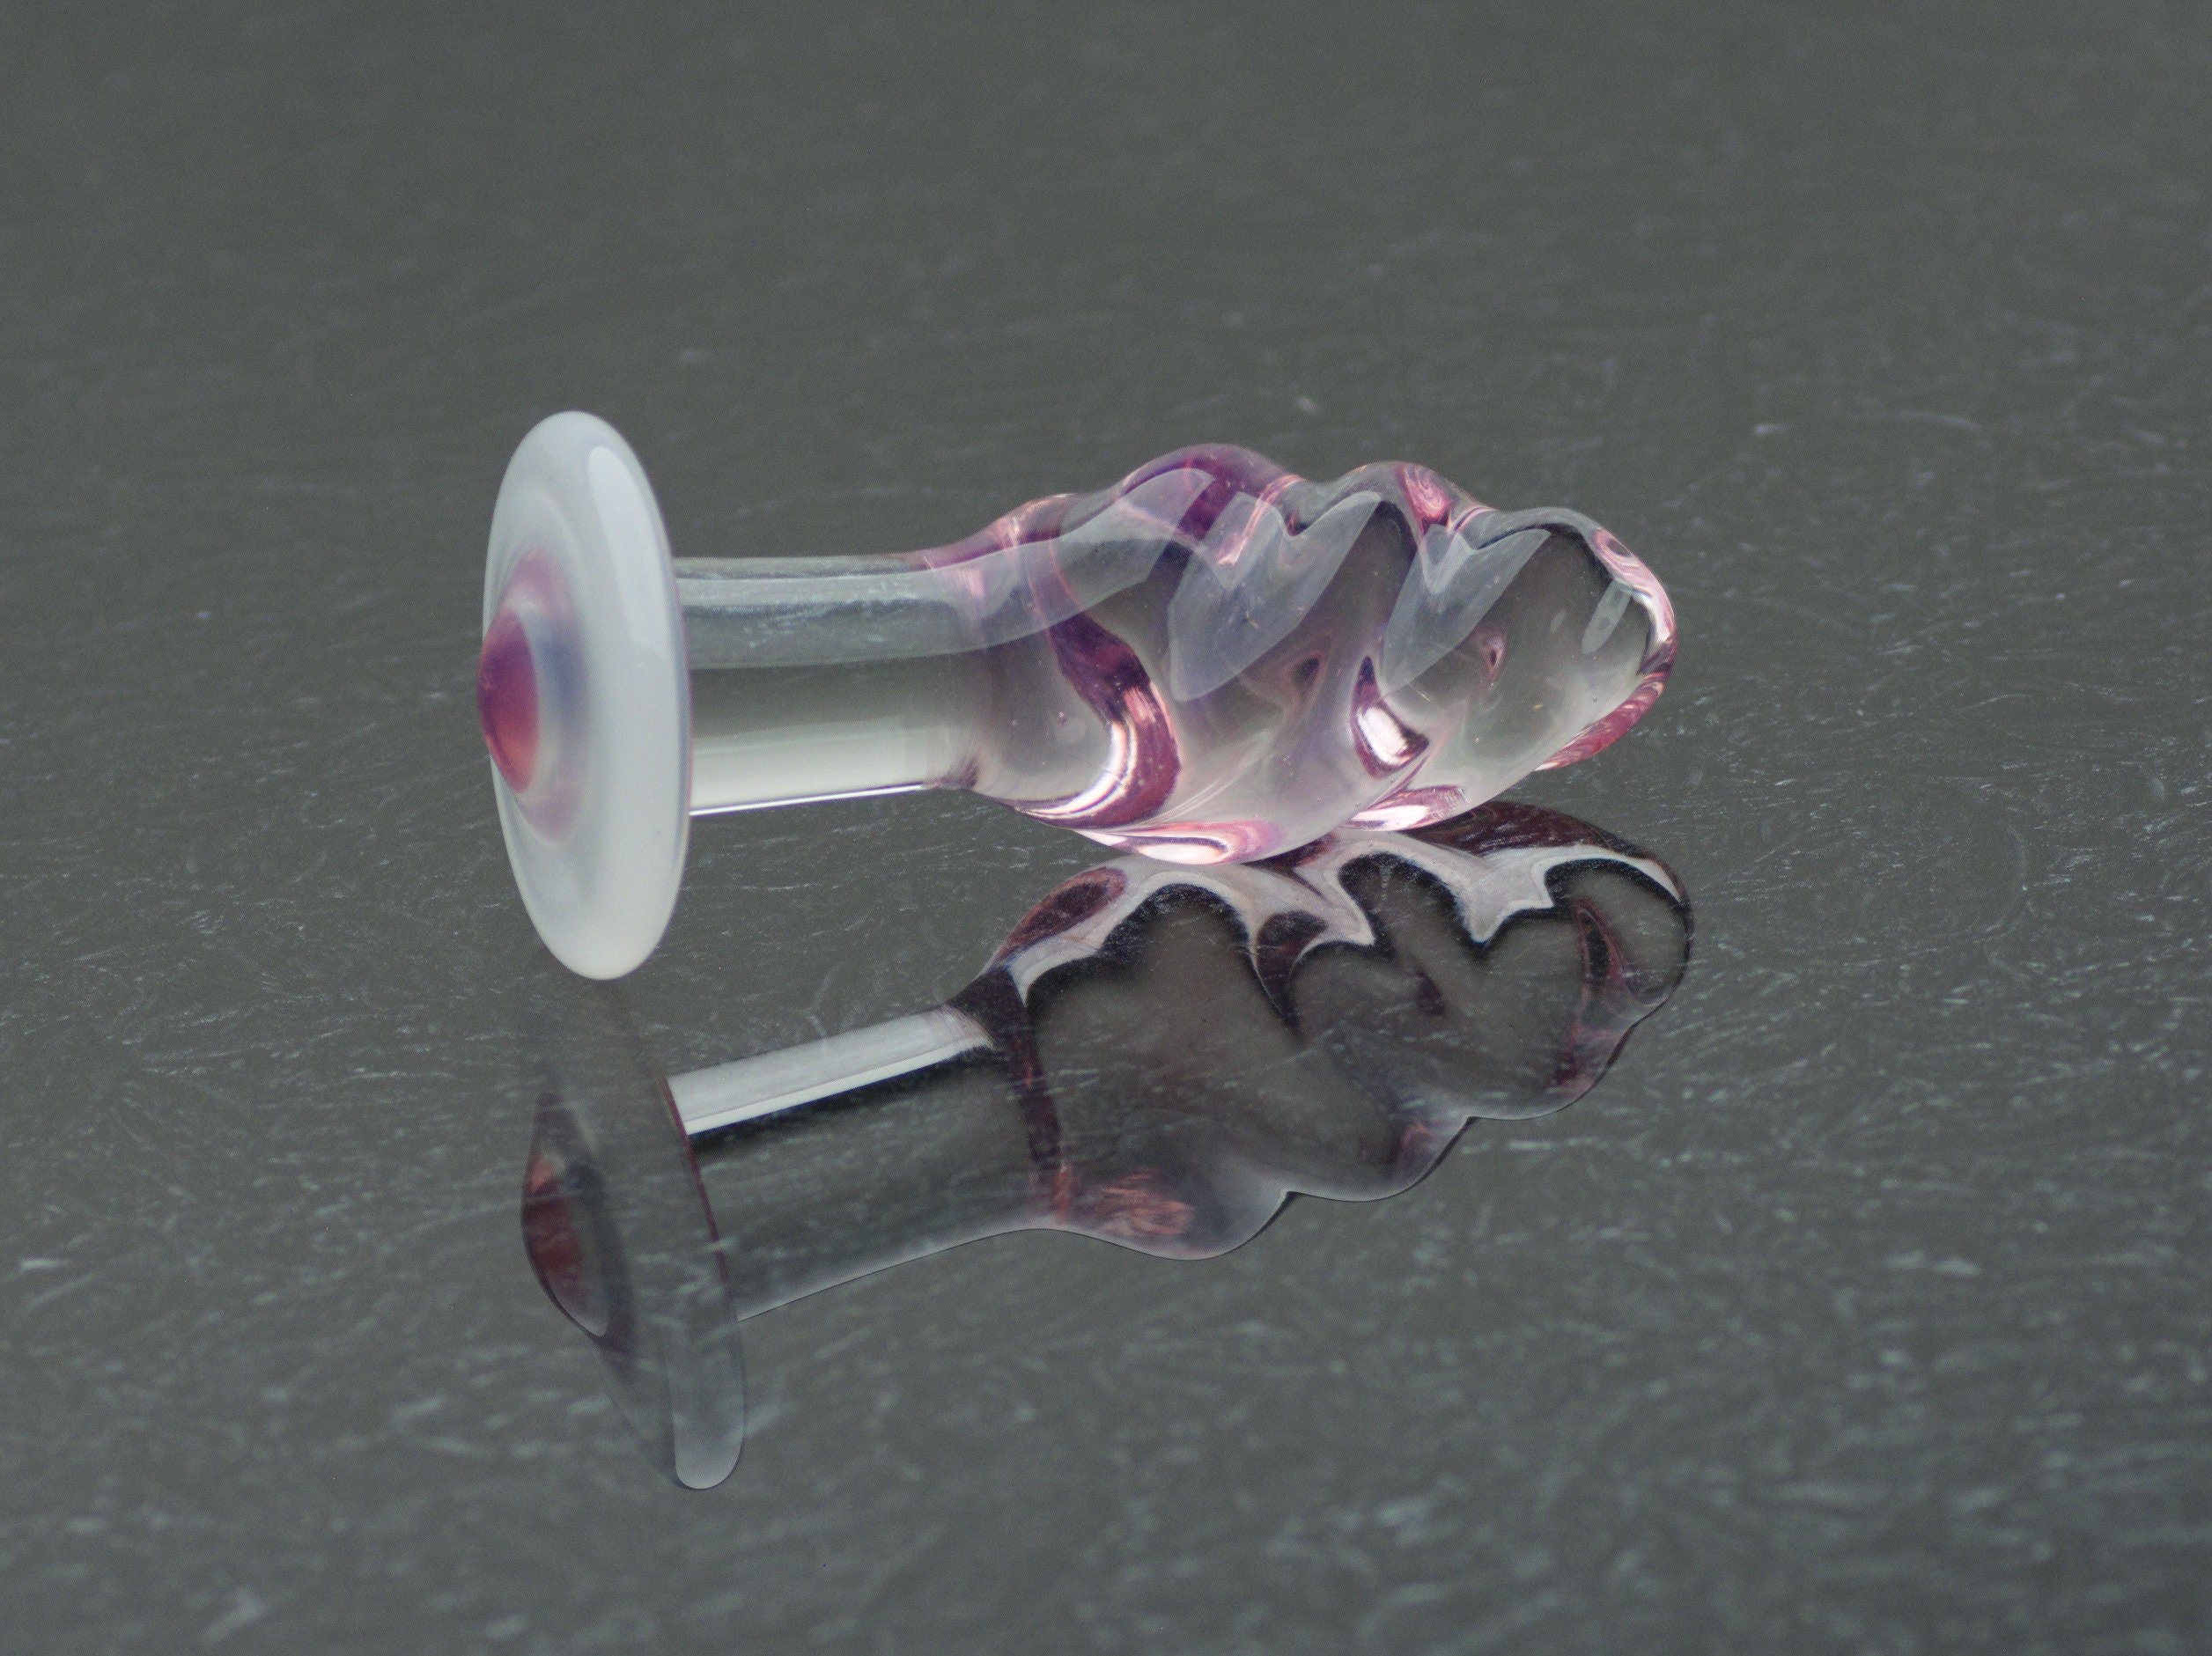 Glass Butt Plug - Small - Pretty Pink Twist - Luxury Sex Toy for Him/Her